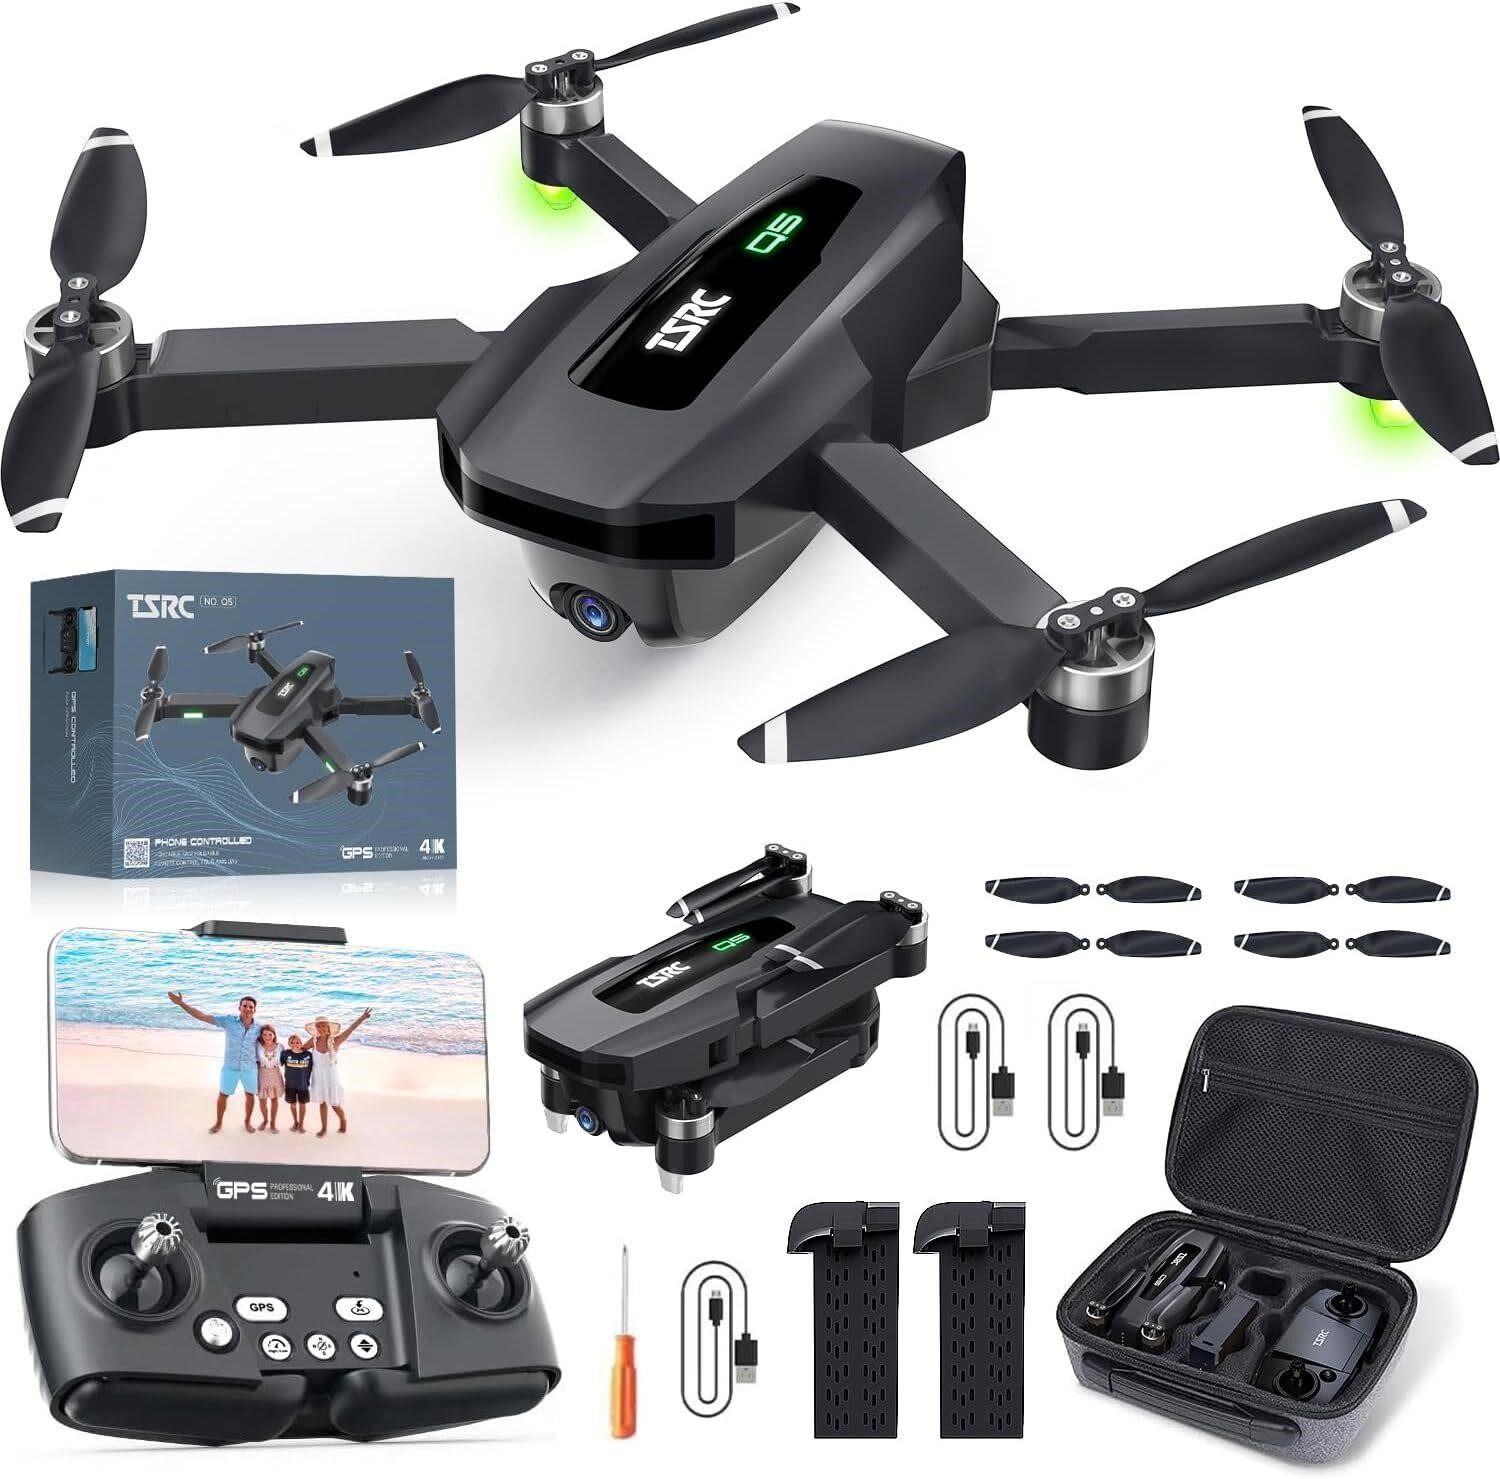 GPS Drone with 4K Camera, TSRC Q5 Quadcopter